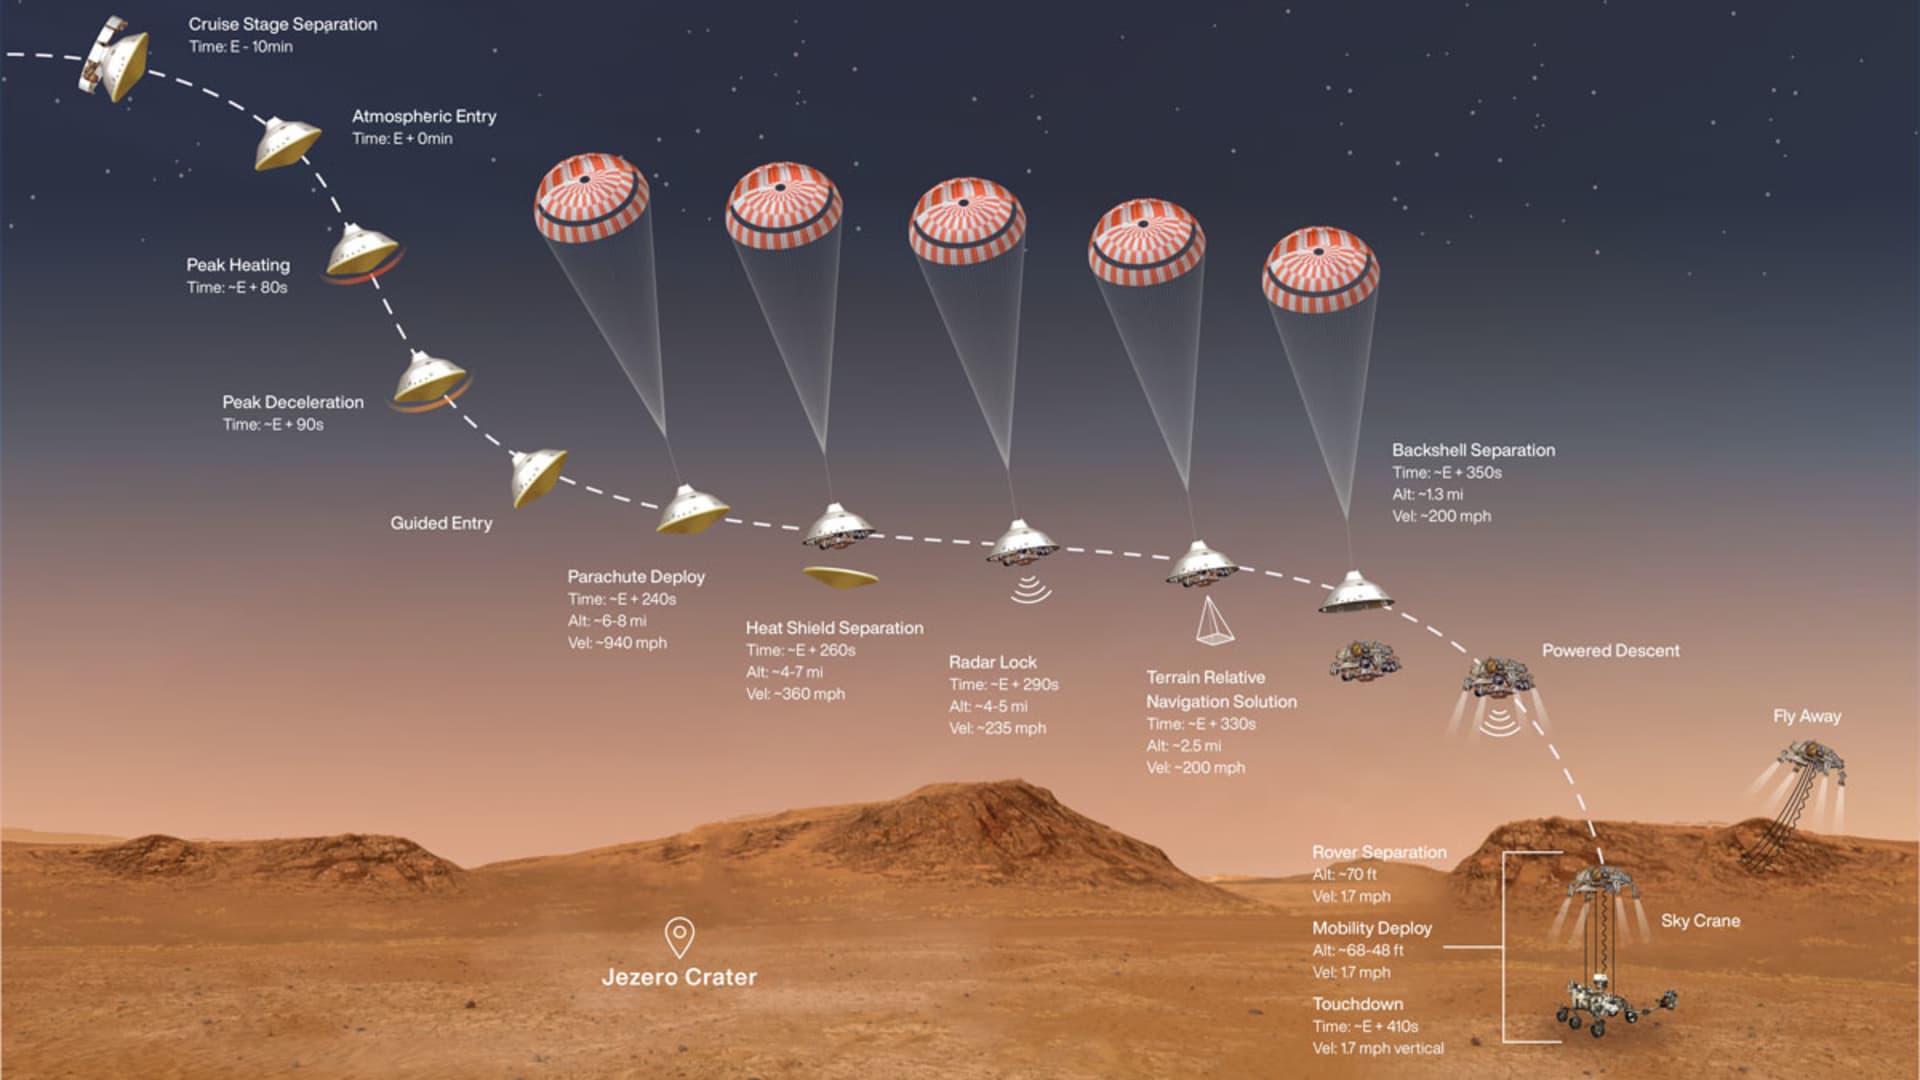 This illustration shows the events that occur in the final minutes of the nearly seven-month journey that NASA's Perseverance rover takes to Mars